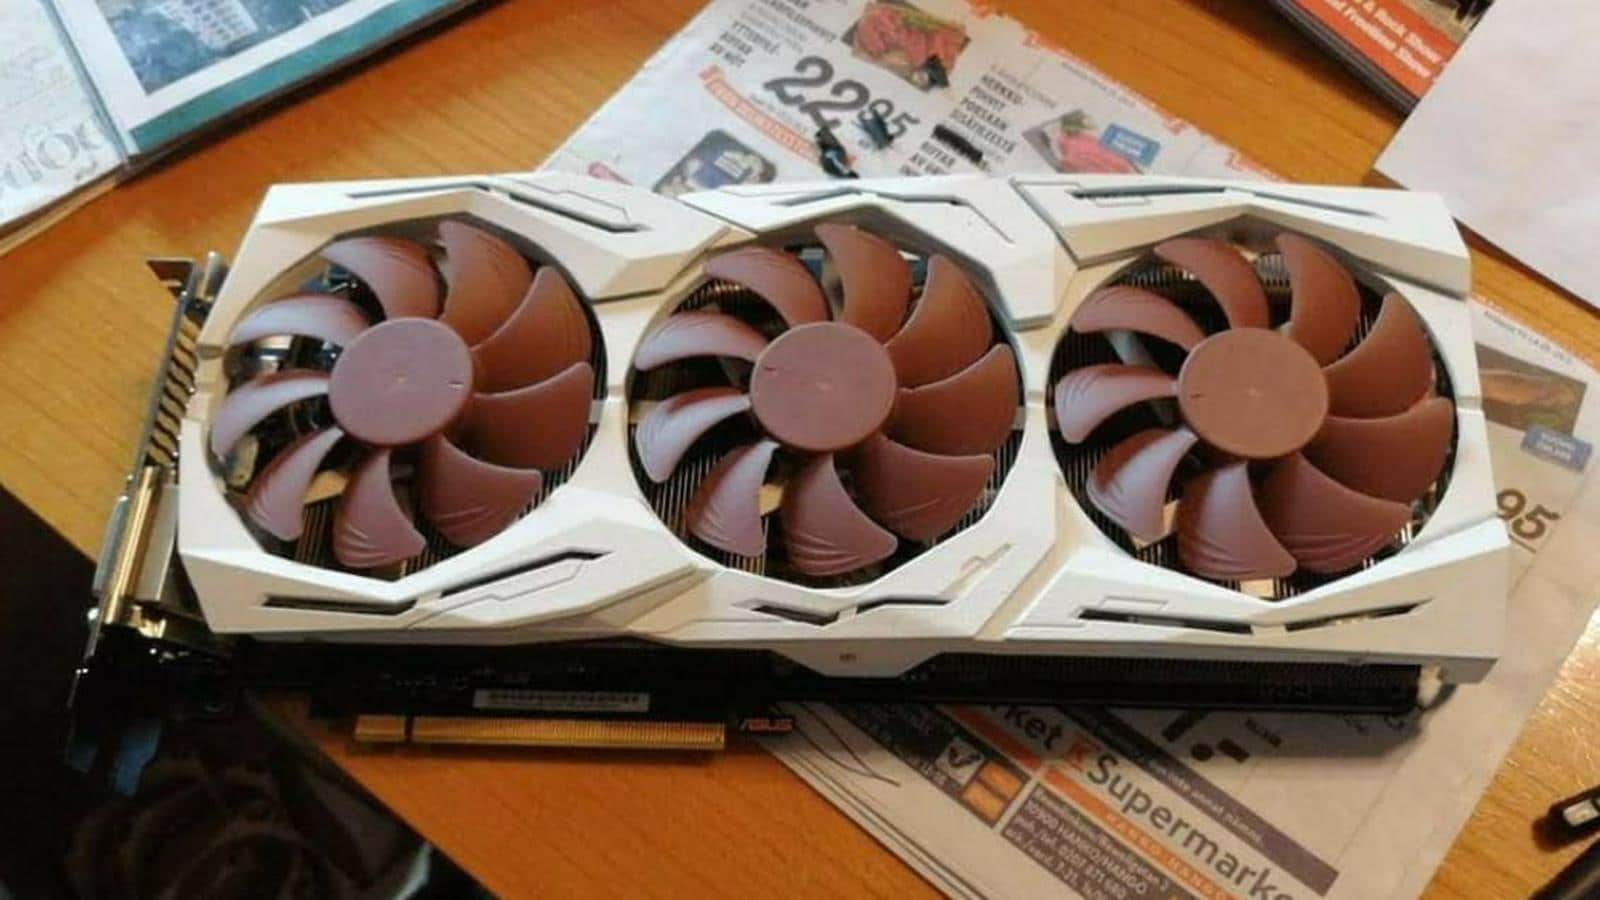 Graphics card with Noctua cooling!  Take a look at the unique RTX 3070 from ASUS